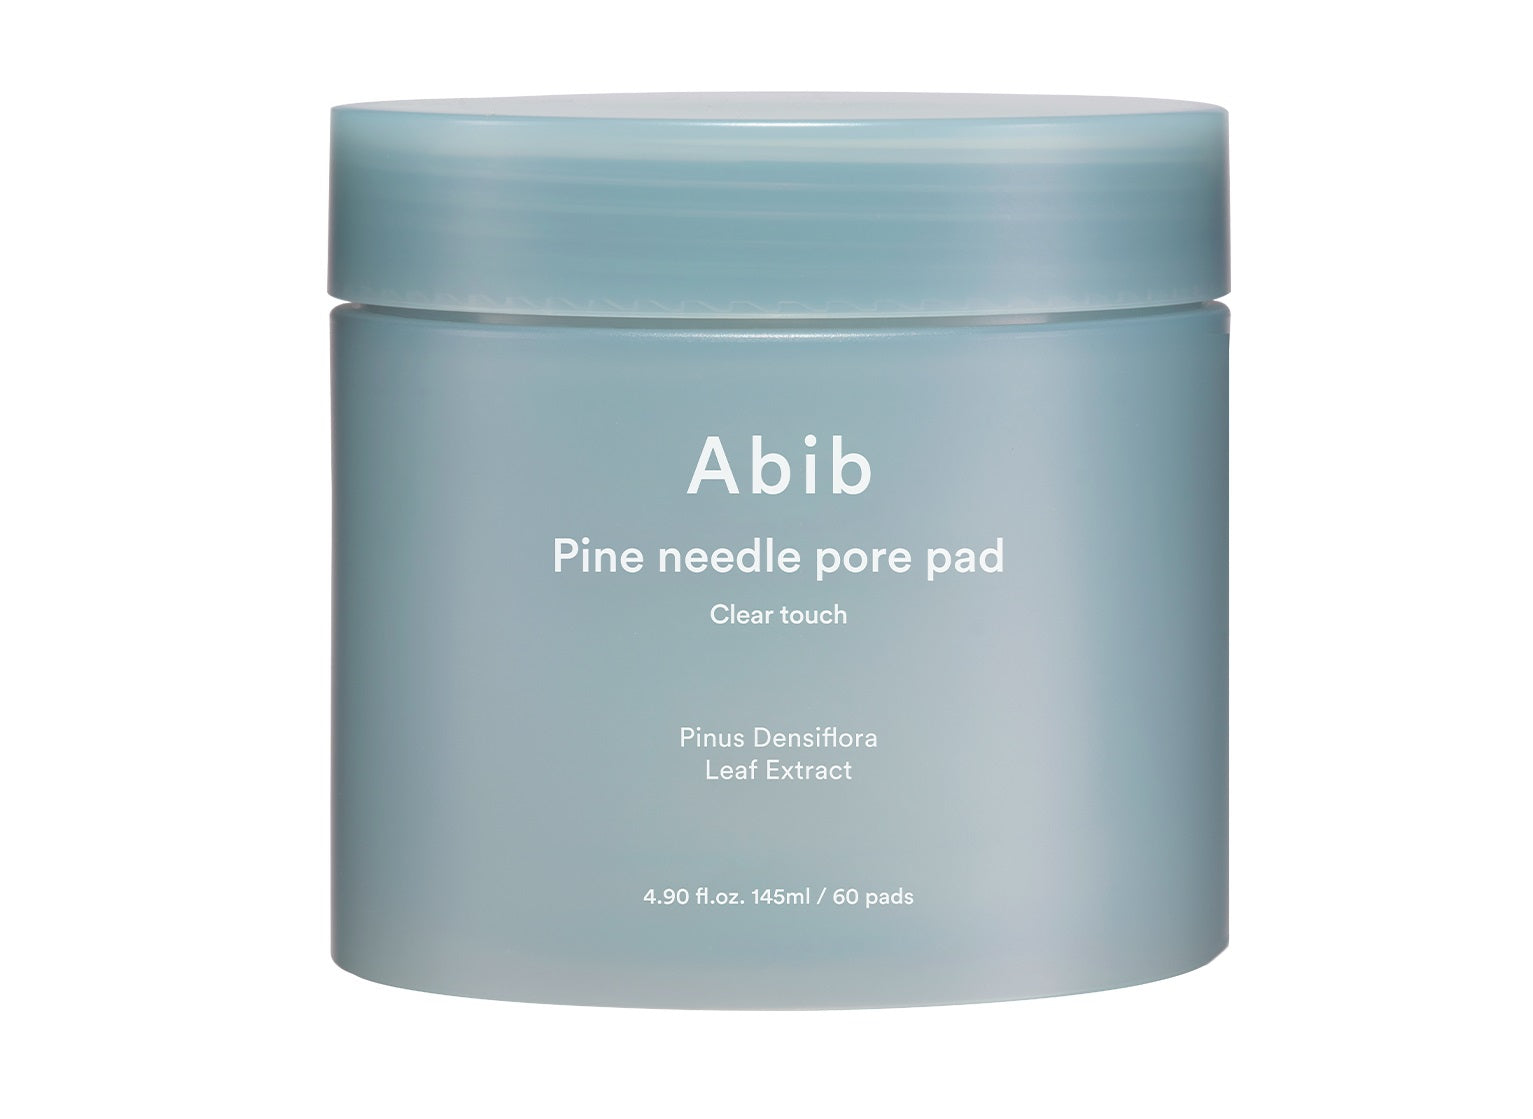 Pine needle pore pad Clear touch